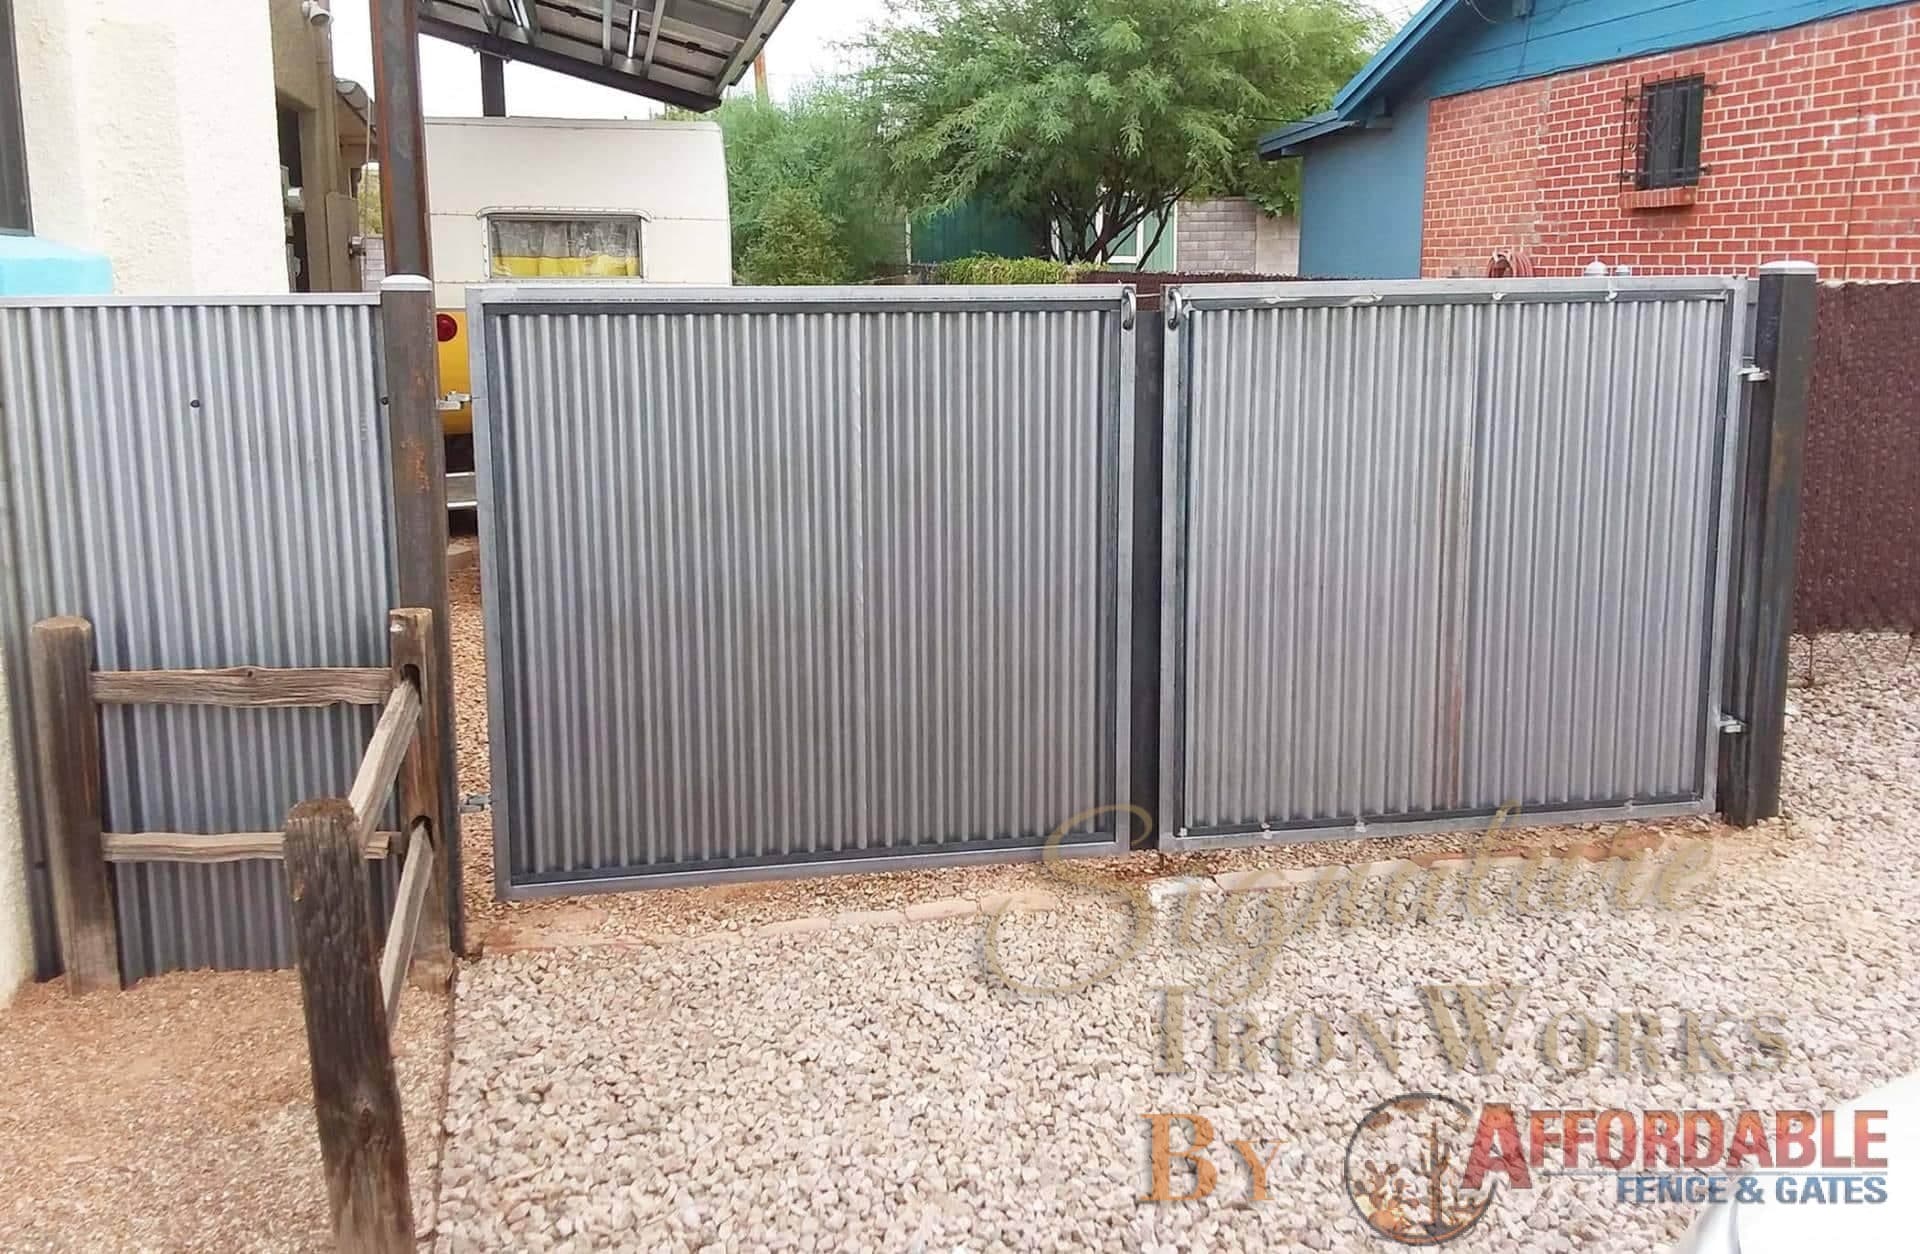 Corrugated Steel Gates Made in Tucson Affordable Fence & Gates